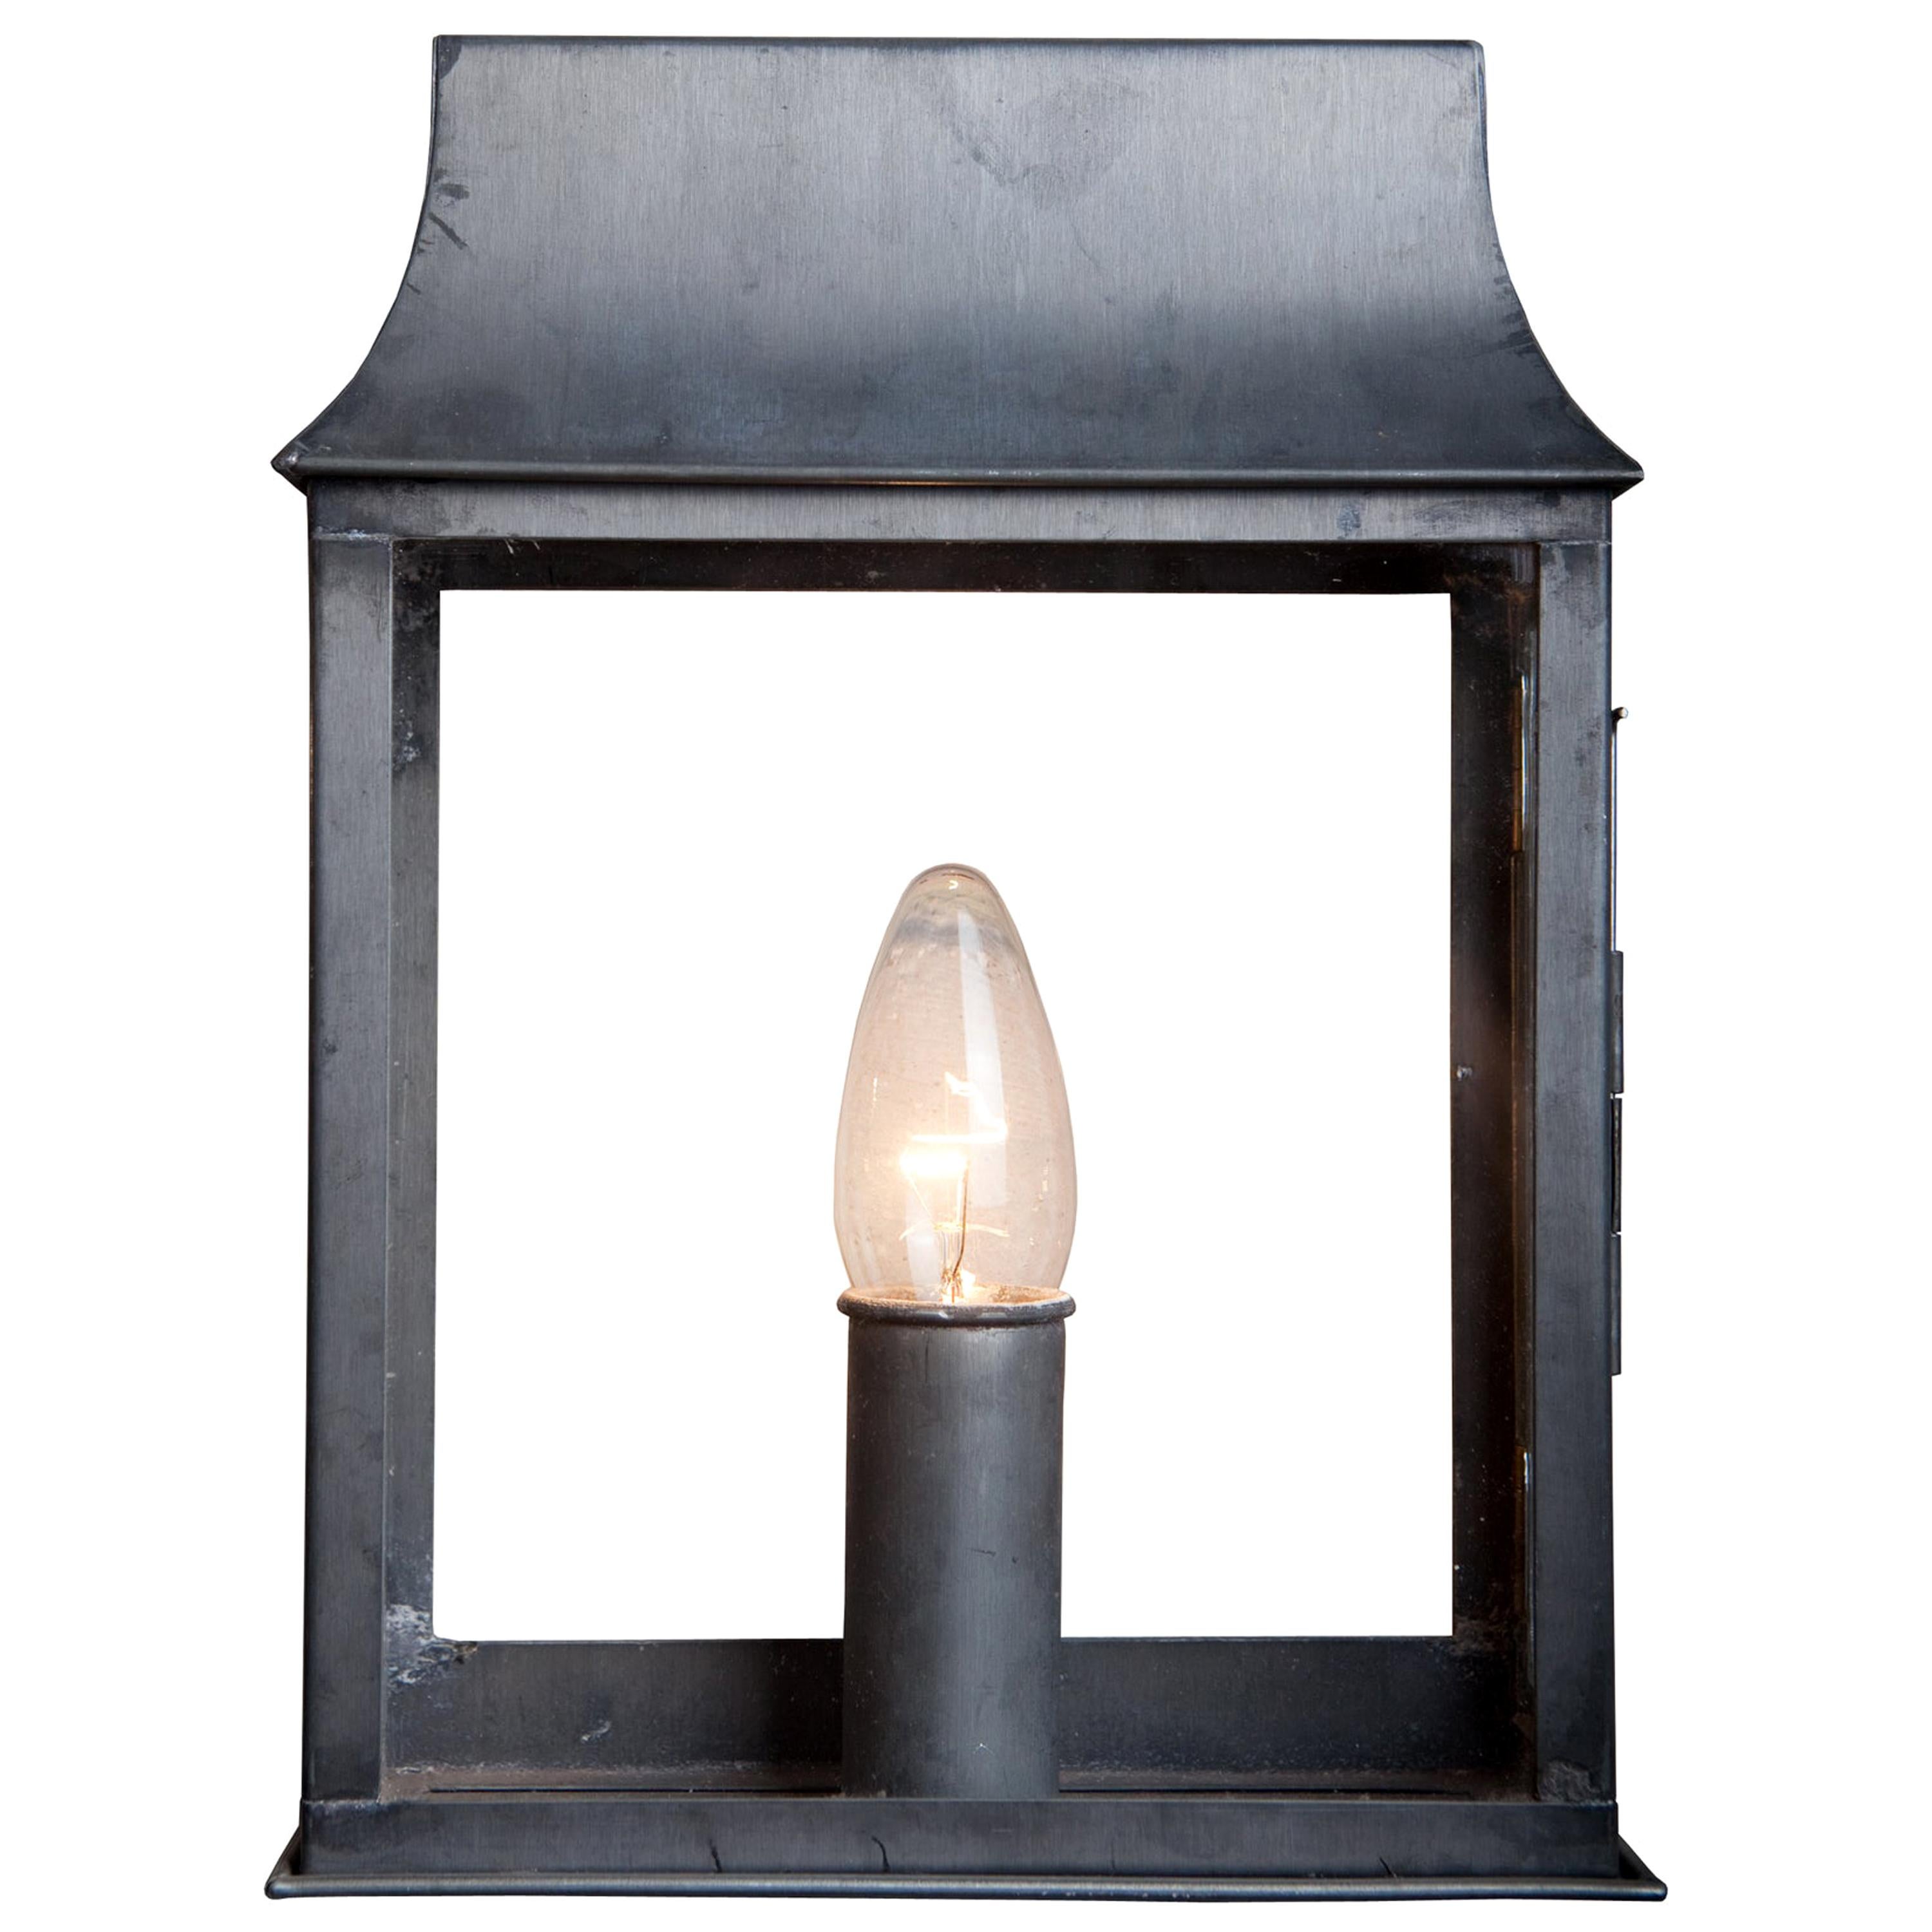 Candle House, Wall Luminaire in Zinc, for Outside or Inside